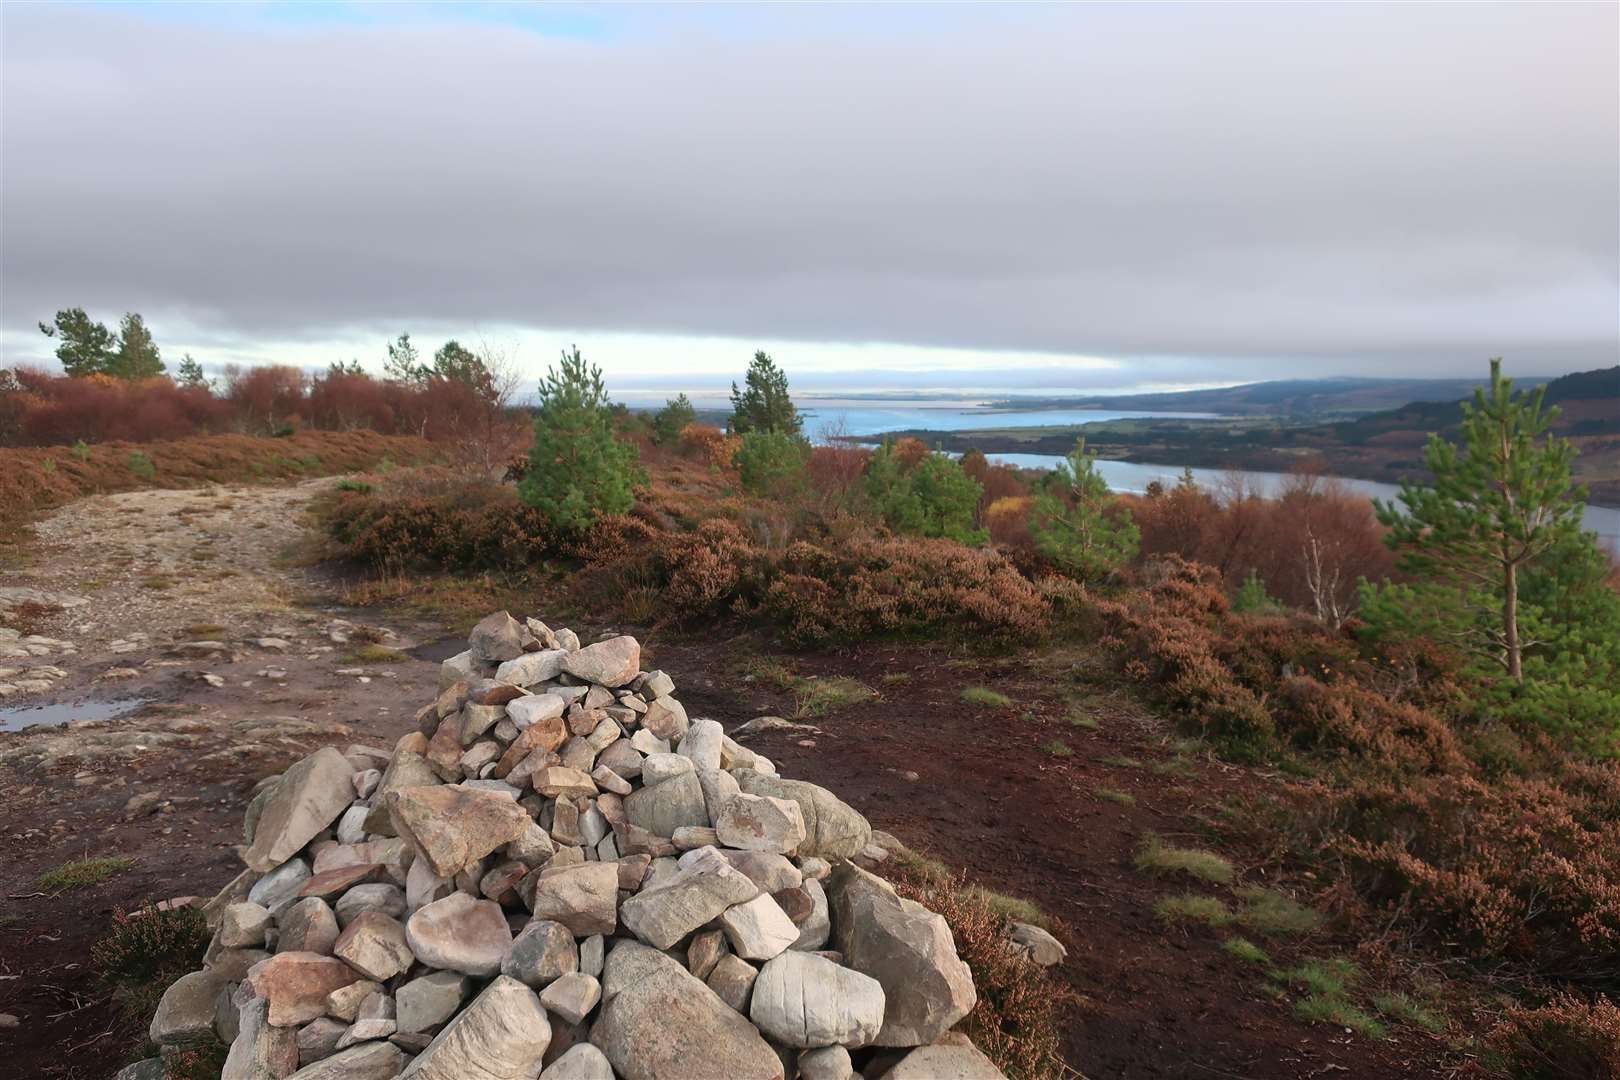 The summit cairn on A’Chraisg and the view out to the Dornoch Firth, taken during an autumn run at Migdale.